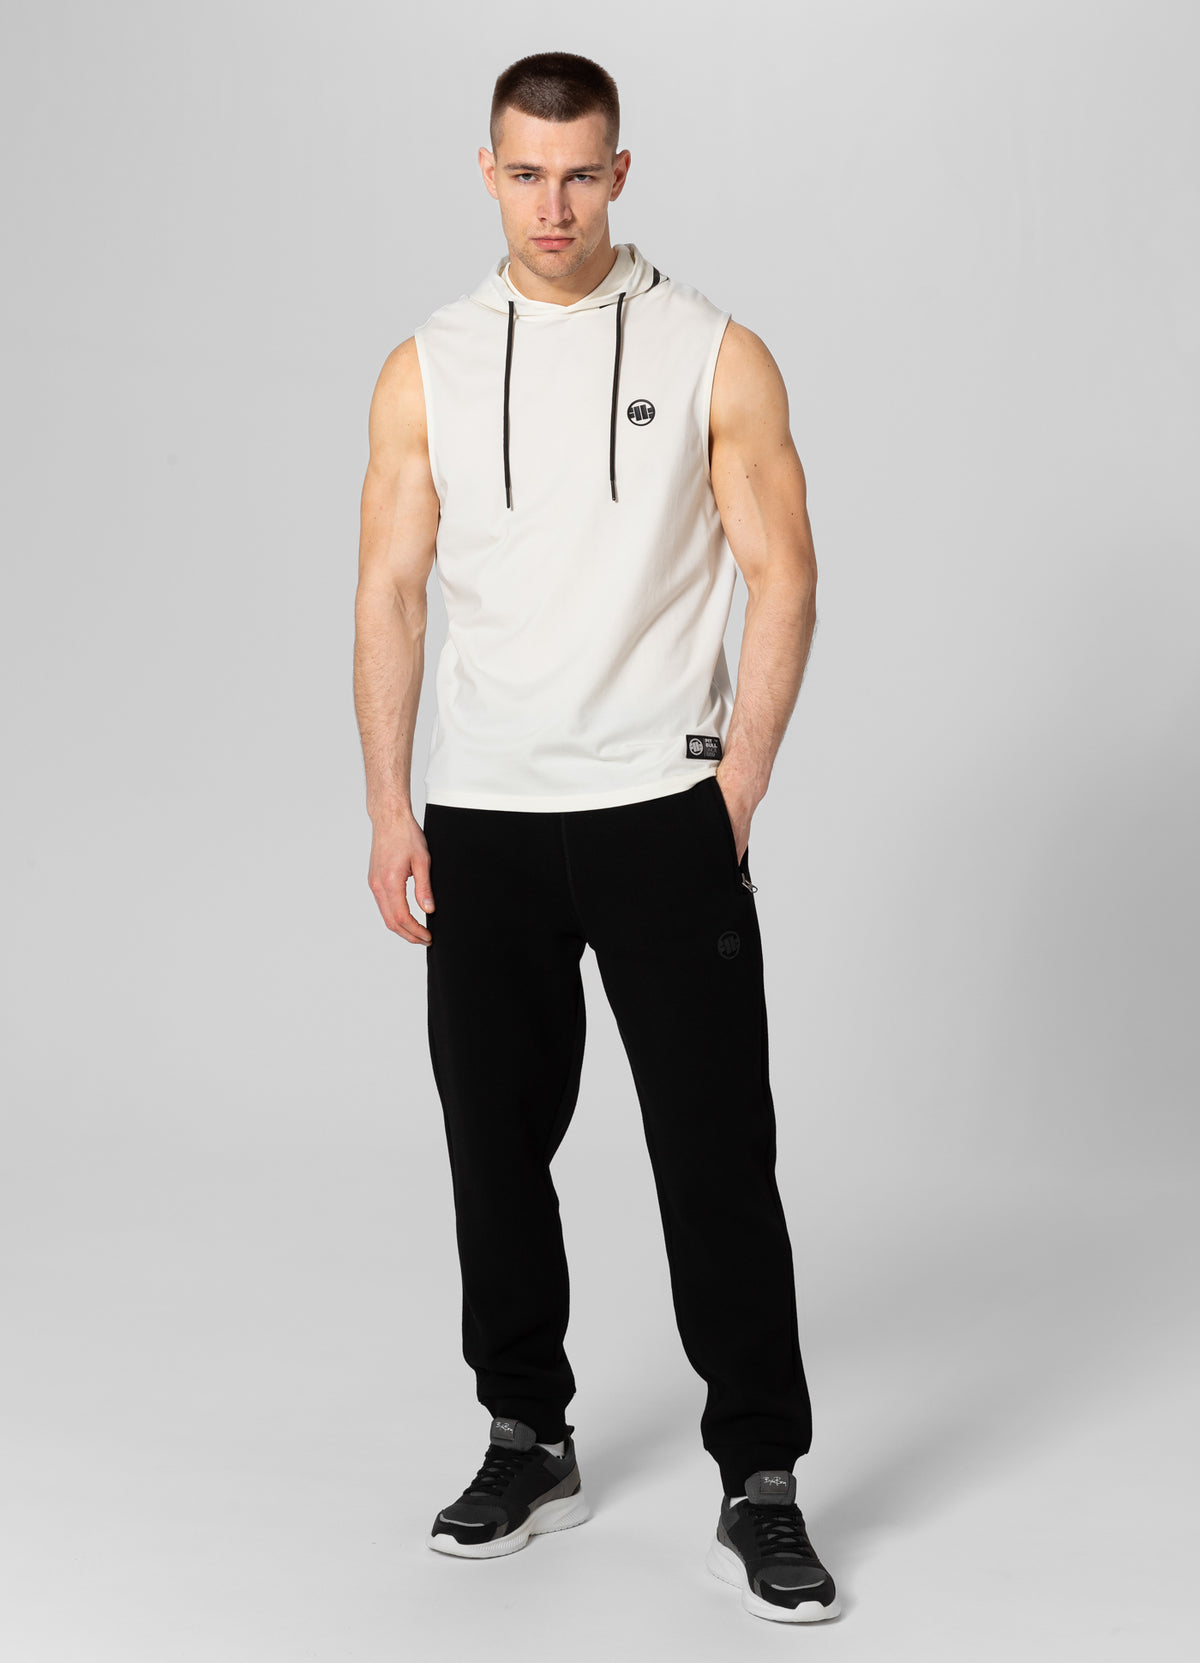 HILLTOP 210 Off White Hooded Tank Top